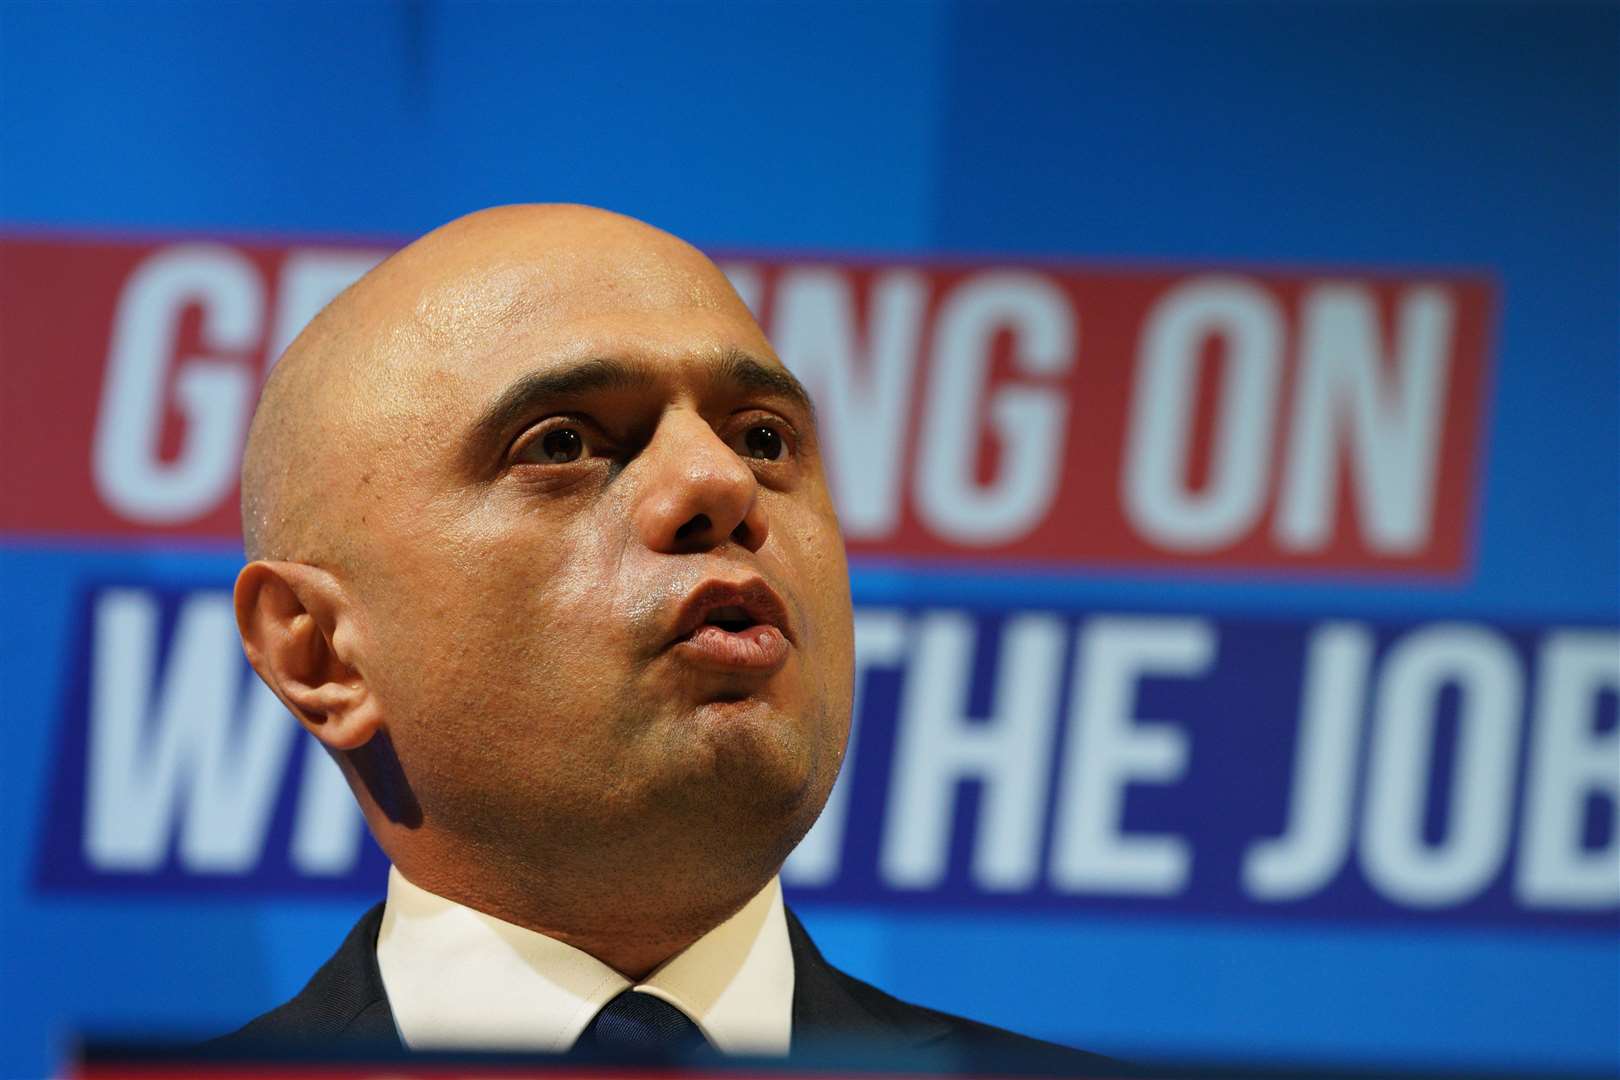 Health Secretary Sajid Javid during the Conservative Party Spring Forum (Peter Byrne/PA)